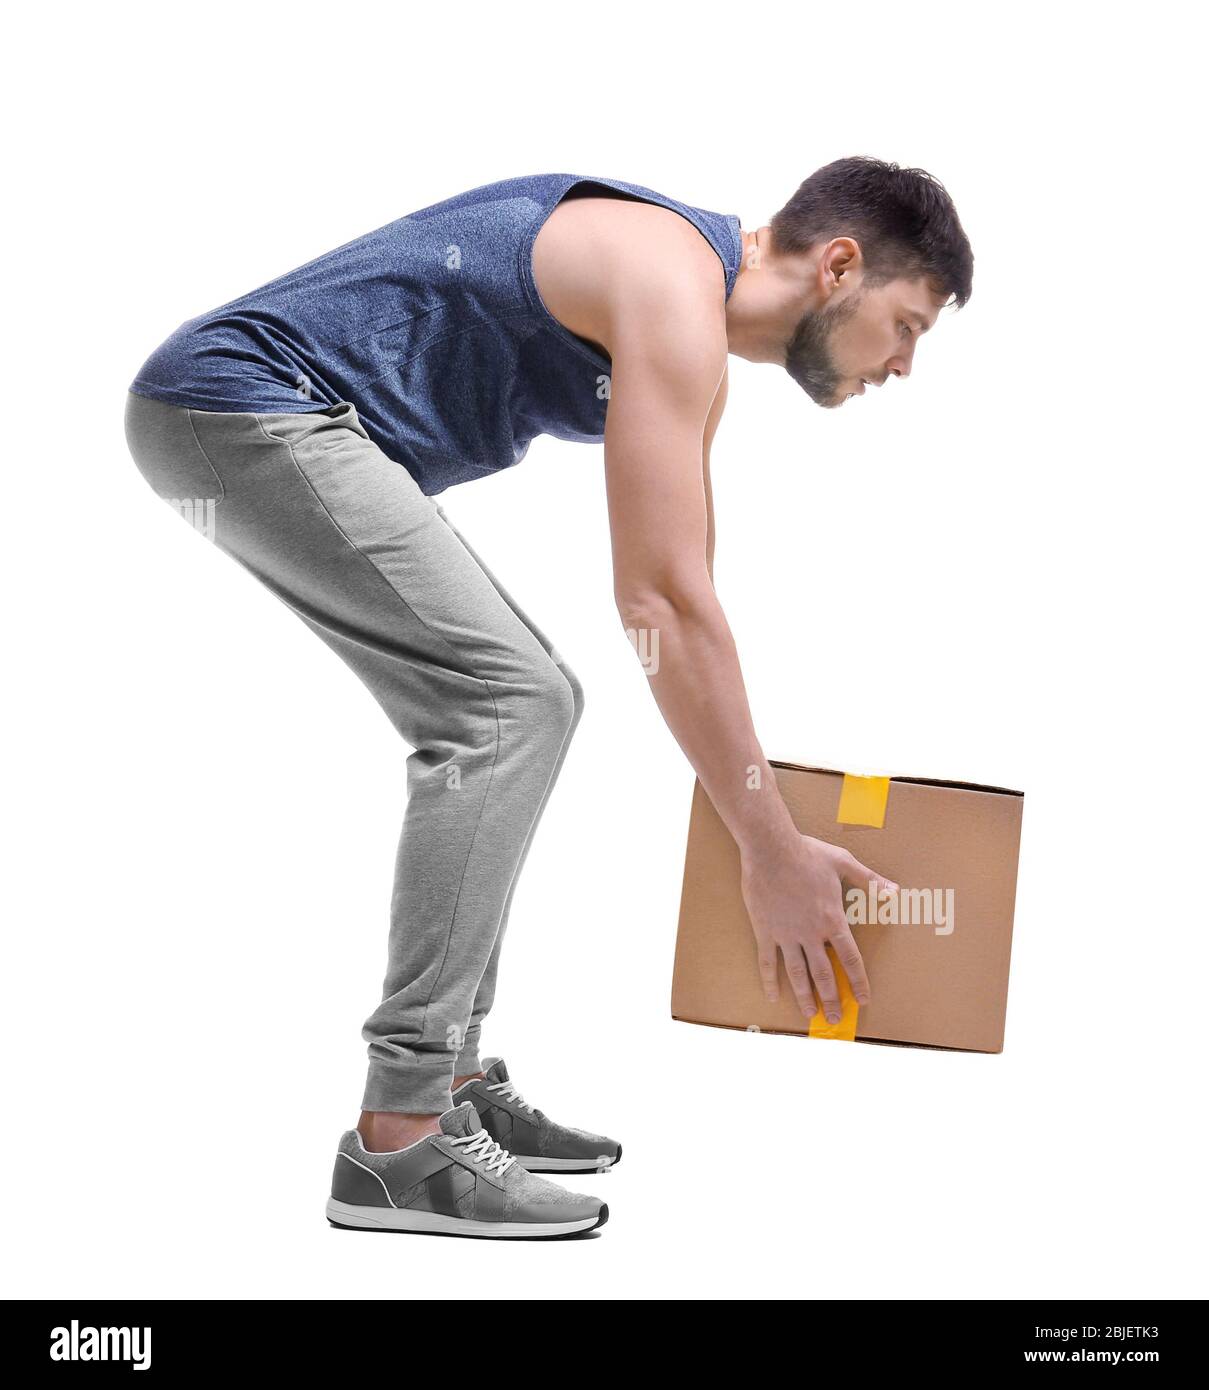 Posture concept. Man lifting heavy cardboard box against white background Stock Photo